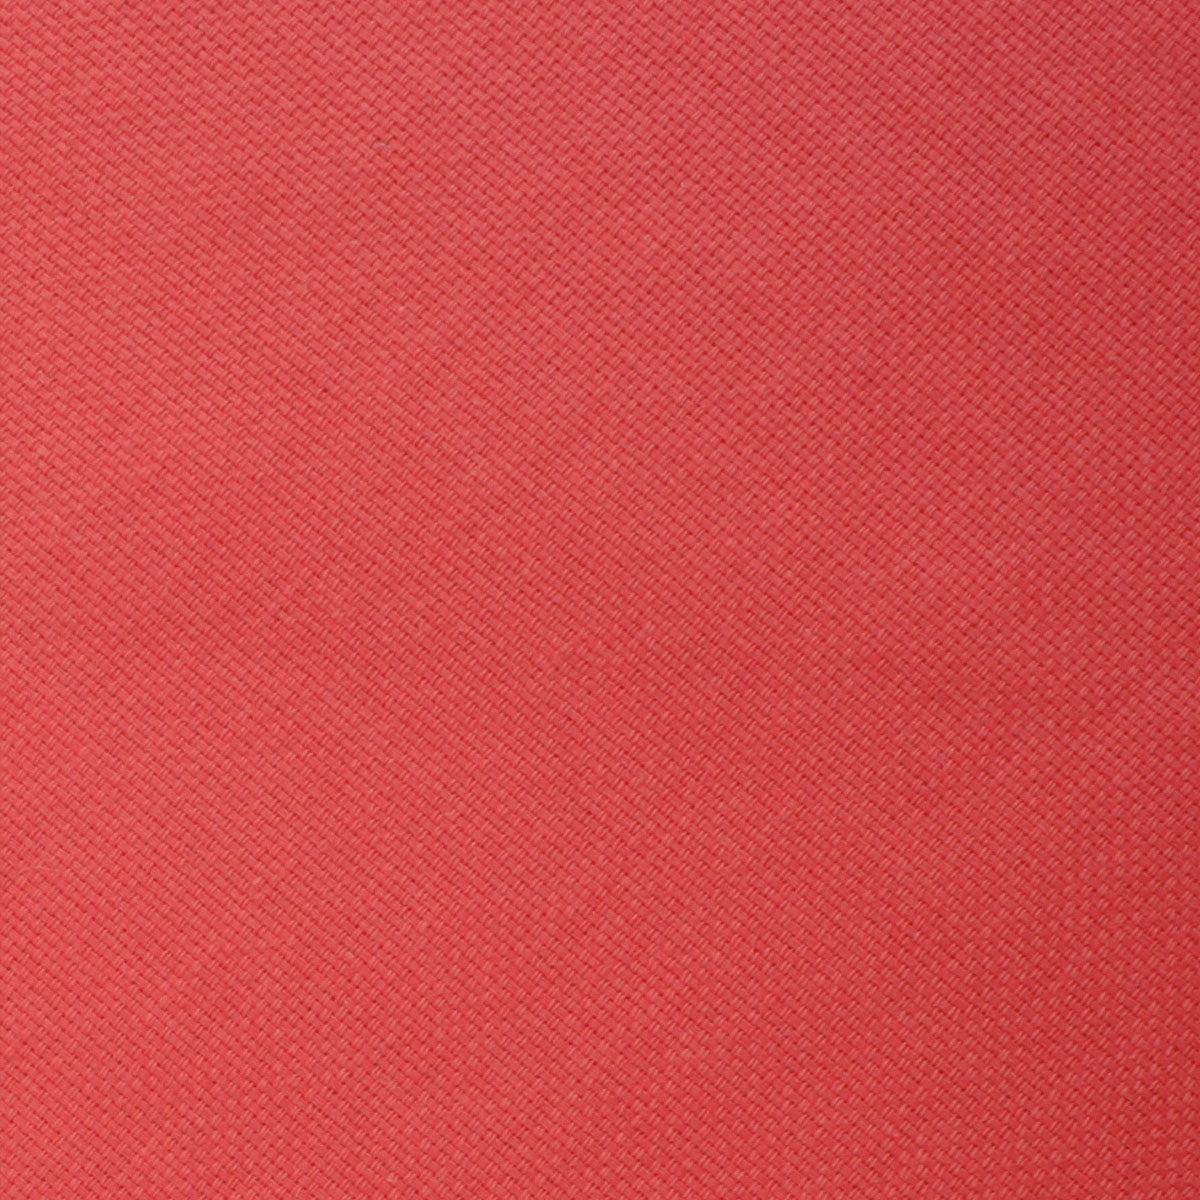 Guava Coral Linen Fabric Swatch